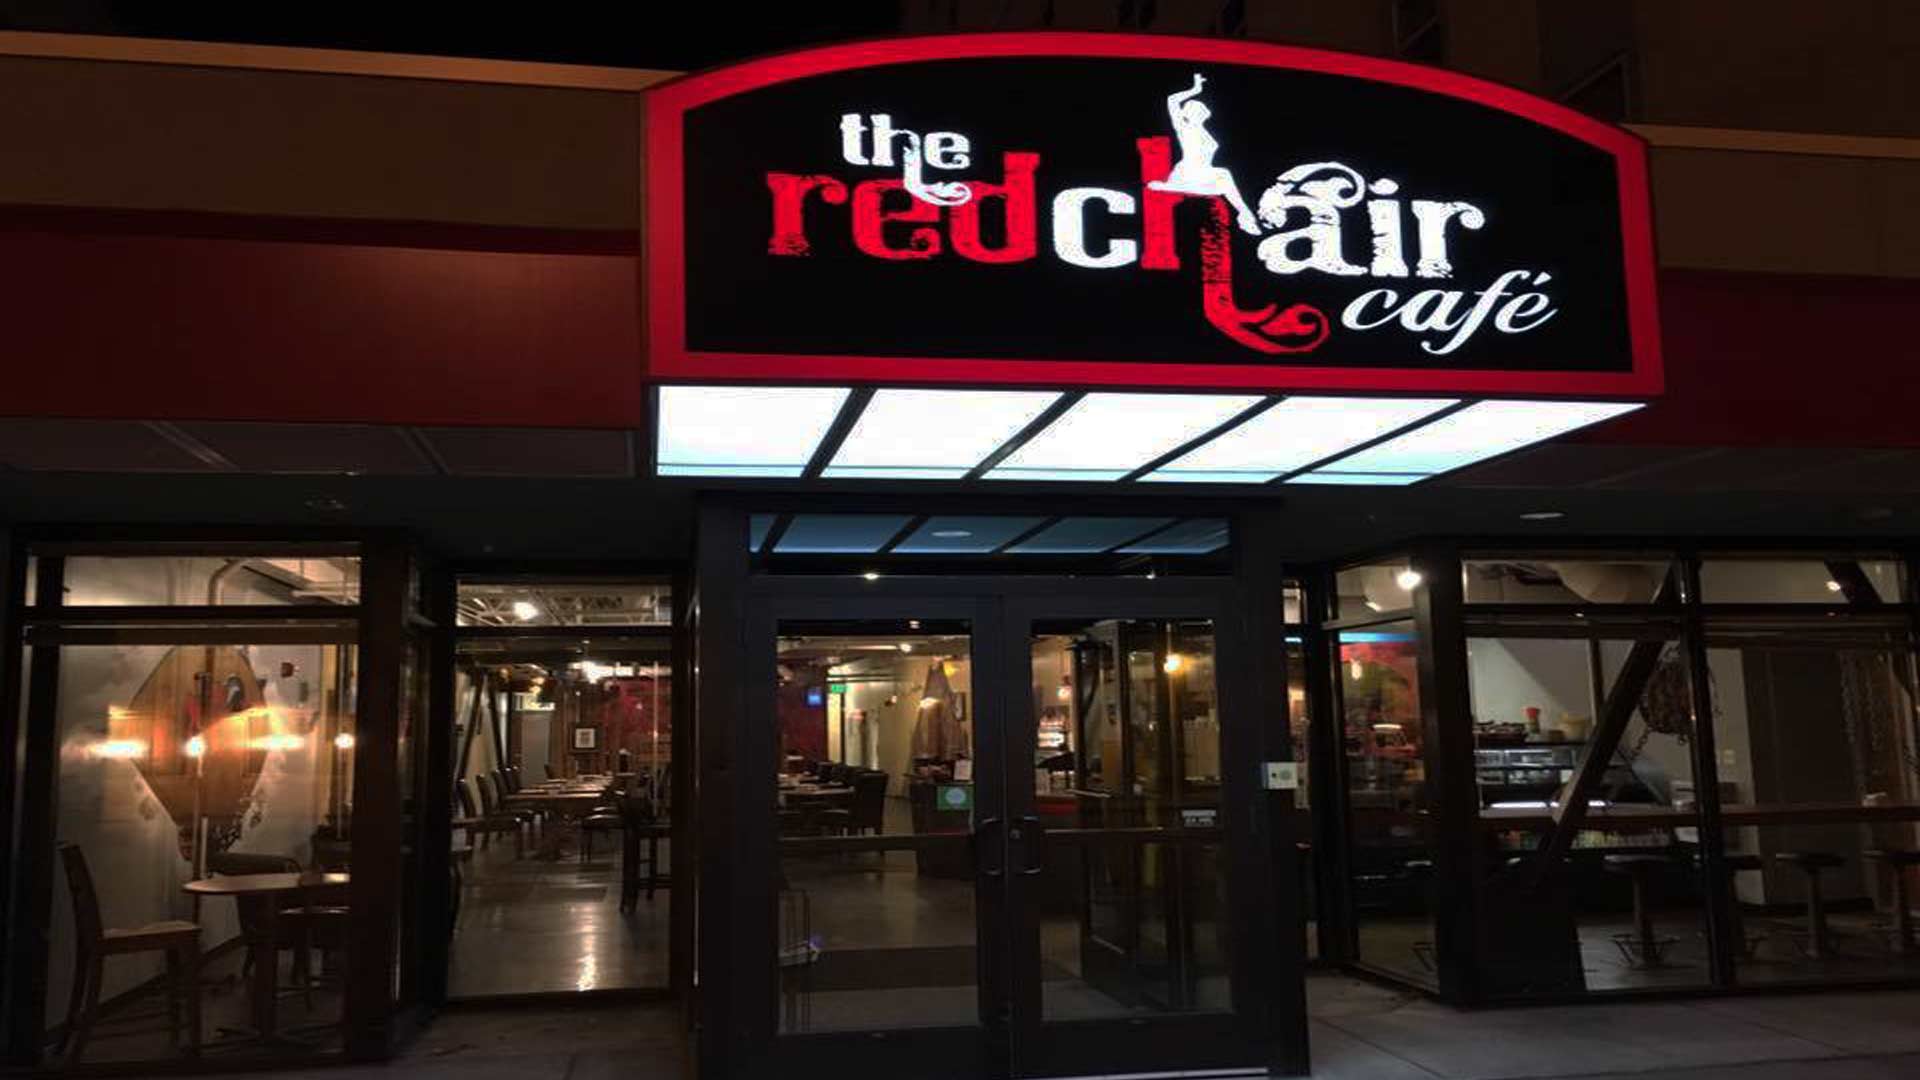 Red Chair Cafe